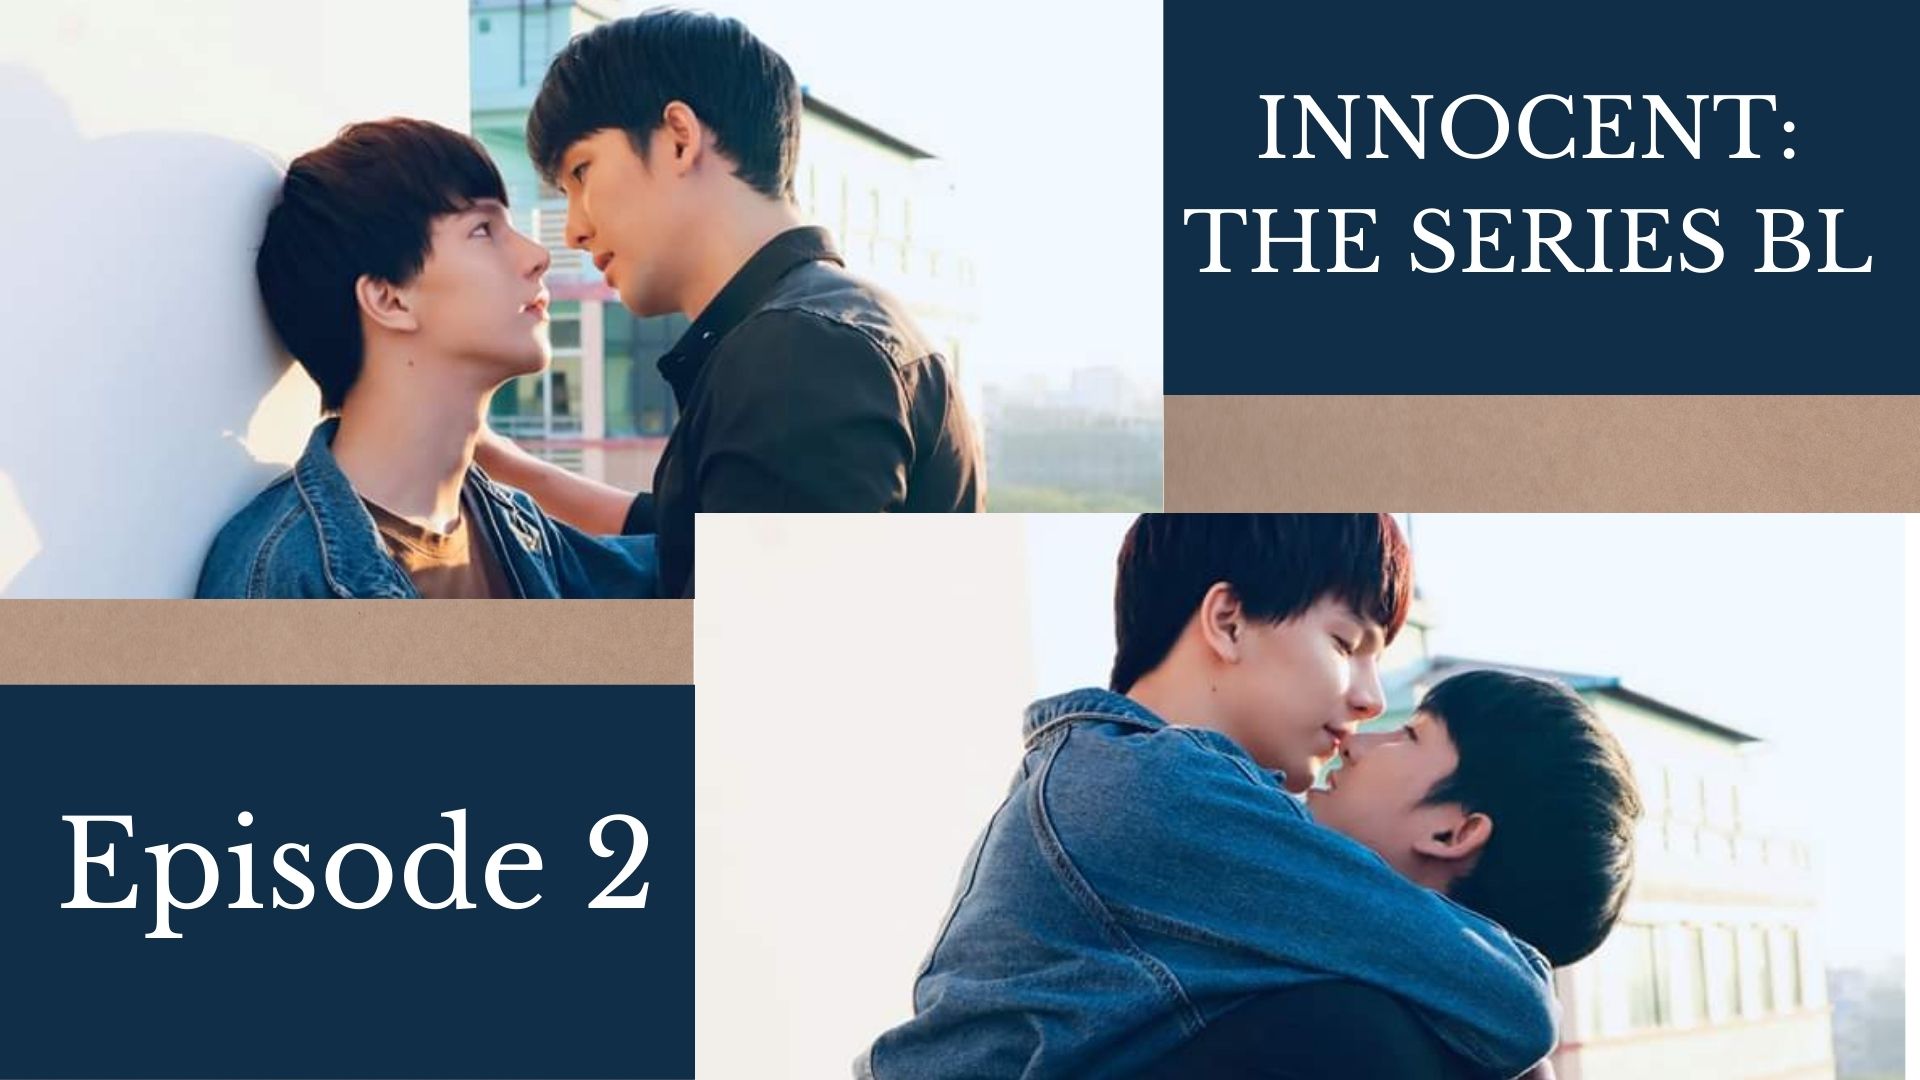 Innocent The Series BL Episode 2: Release Date, Cast, & Preview